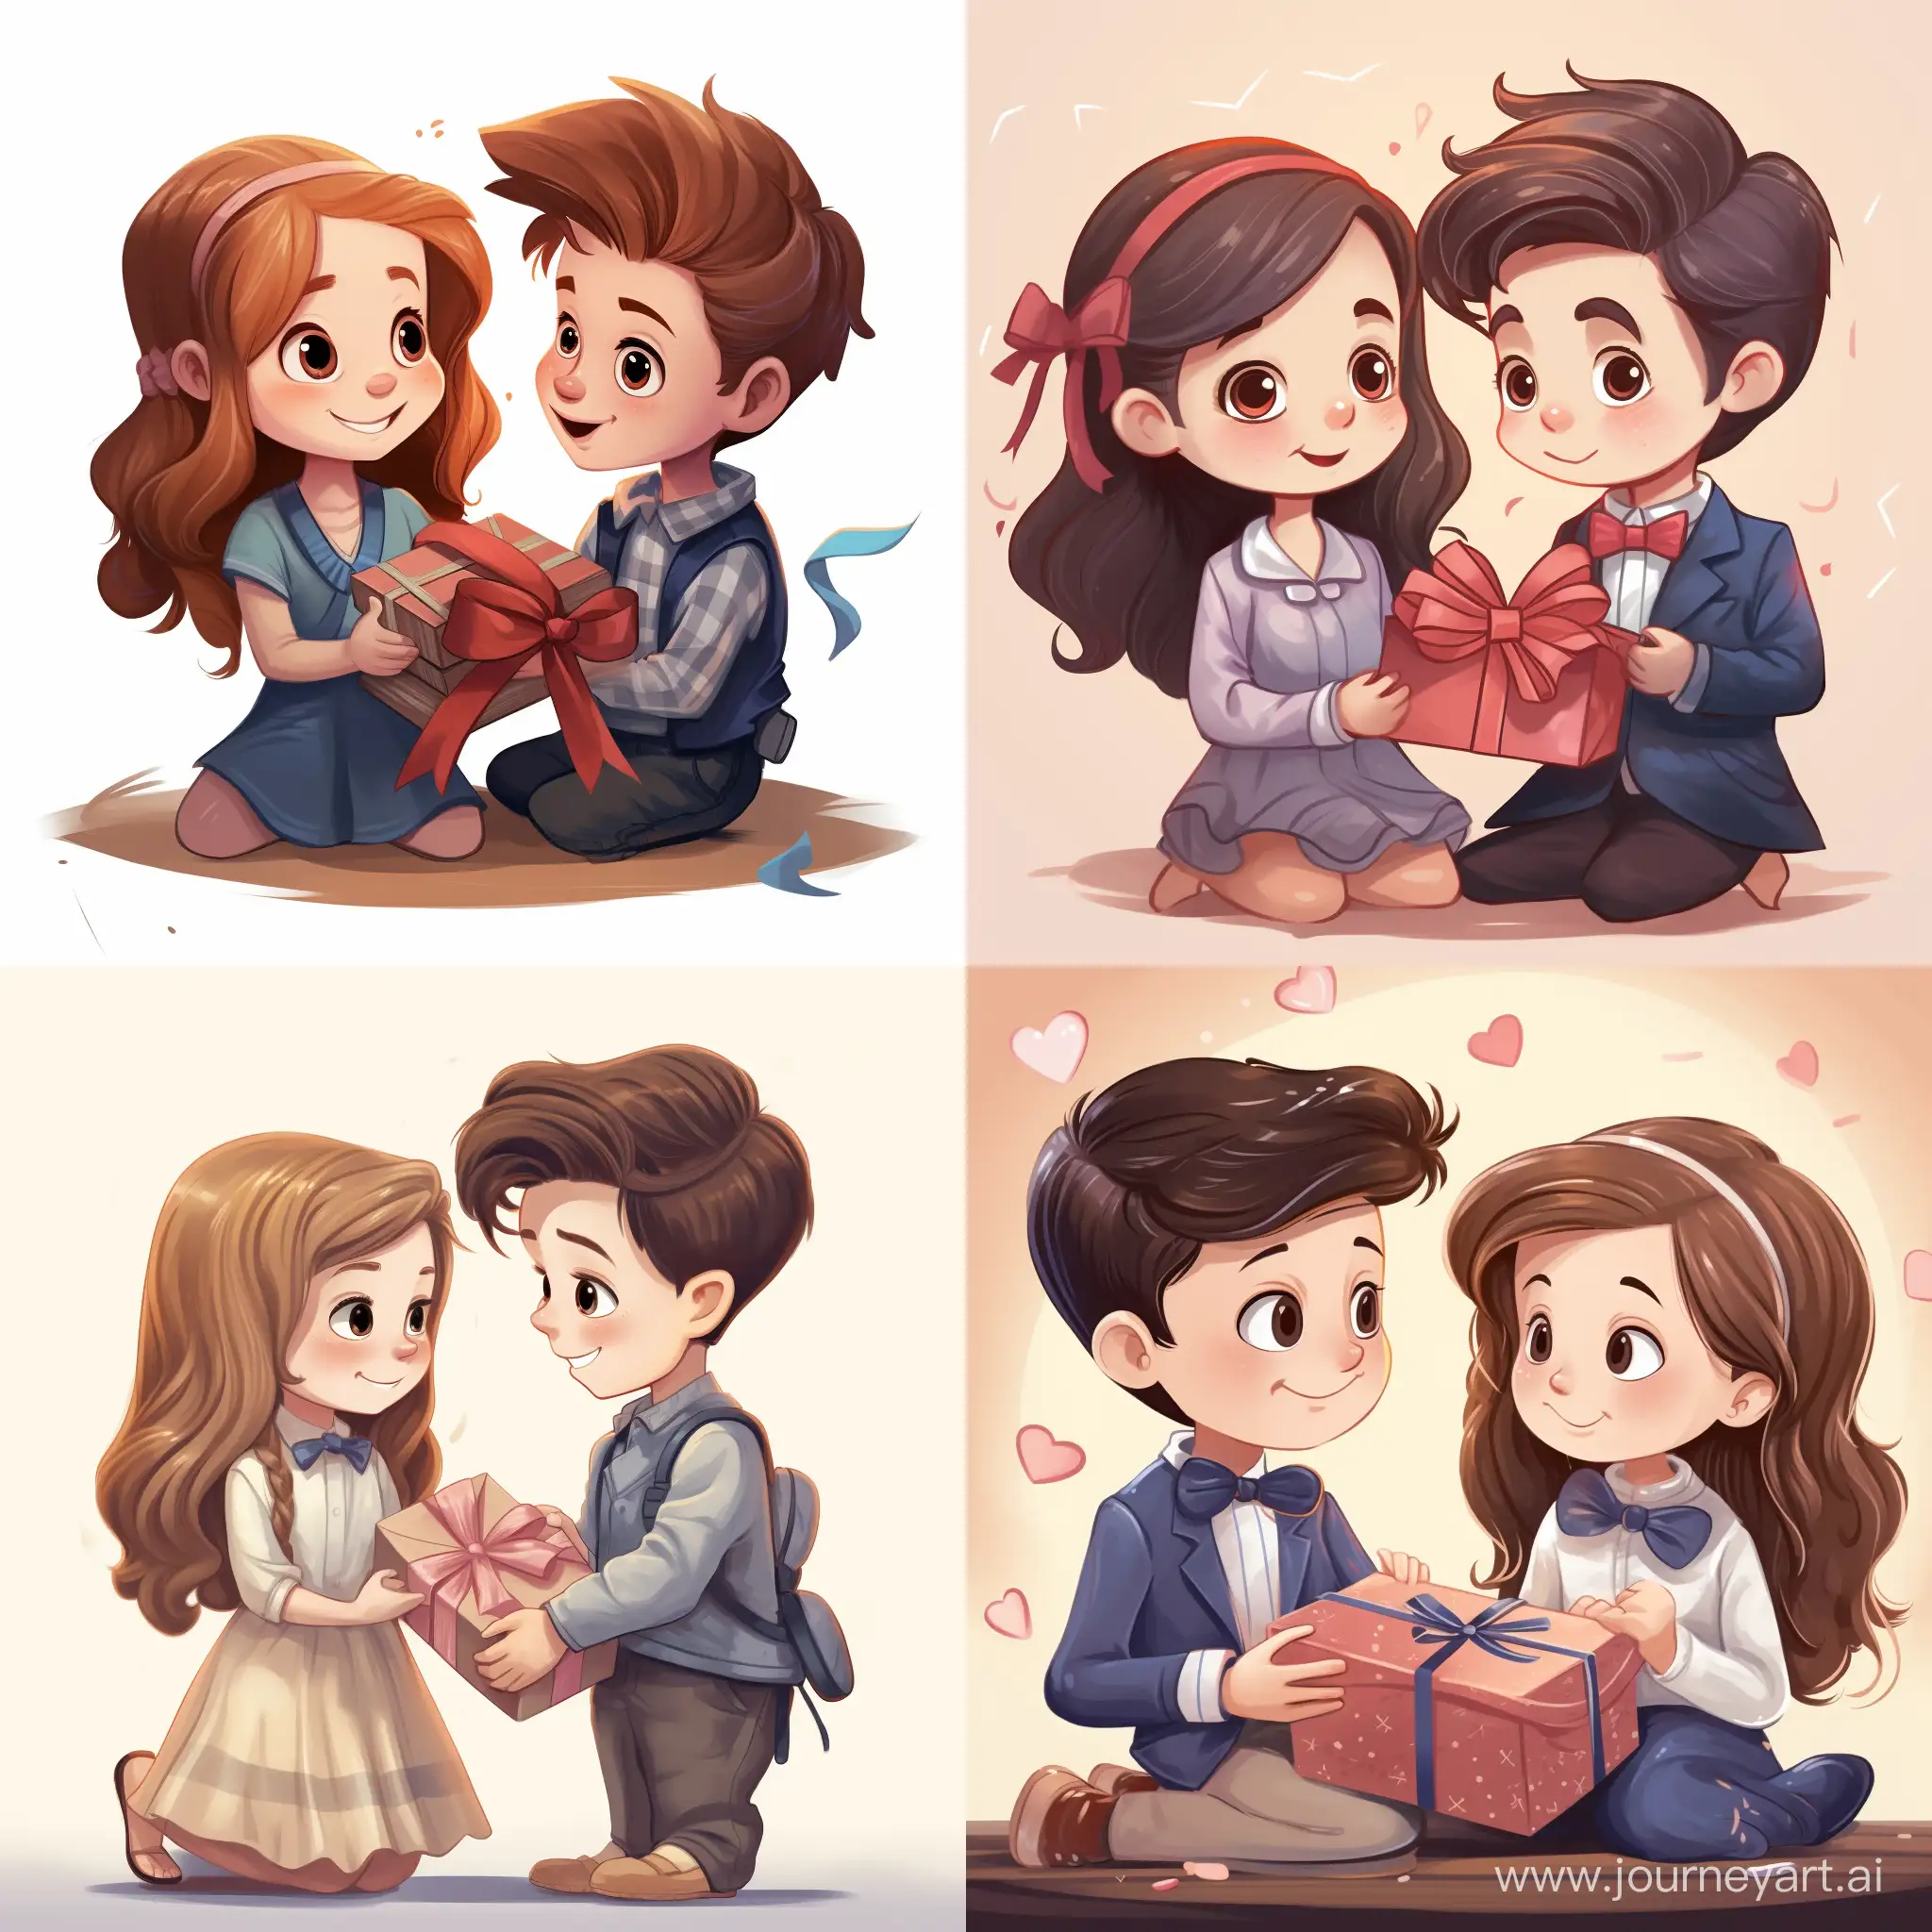 Cartoon style. A boy gives a girl a book as a gift, tied with a gift ribbon.